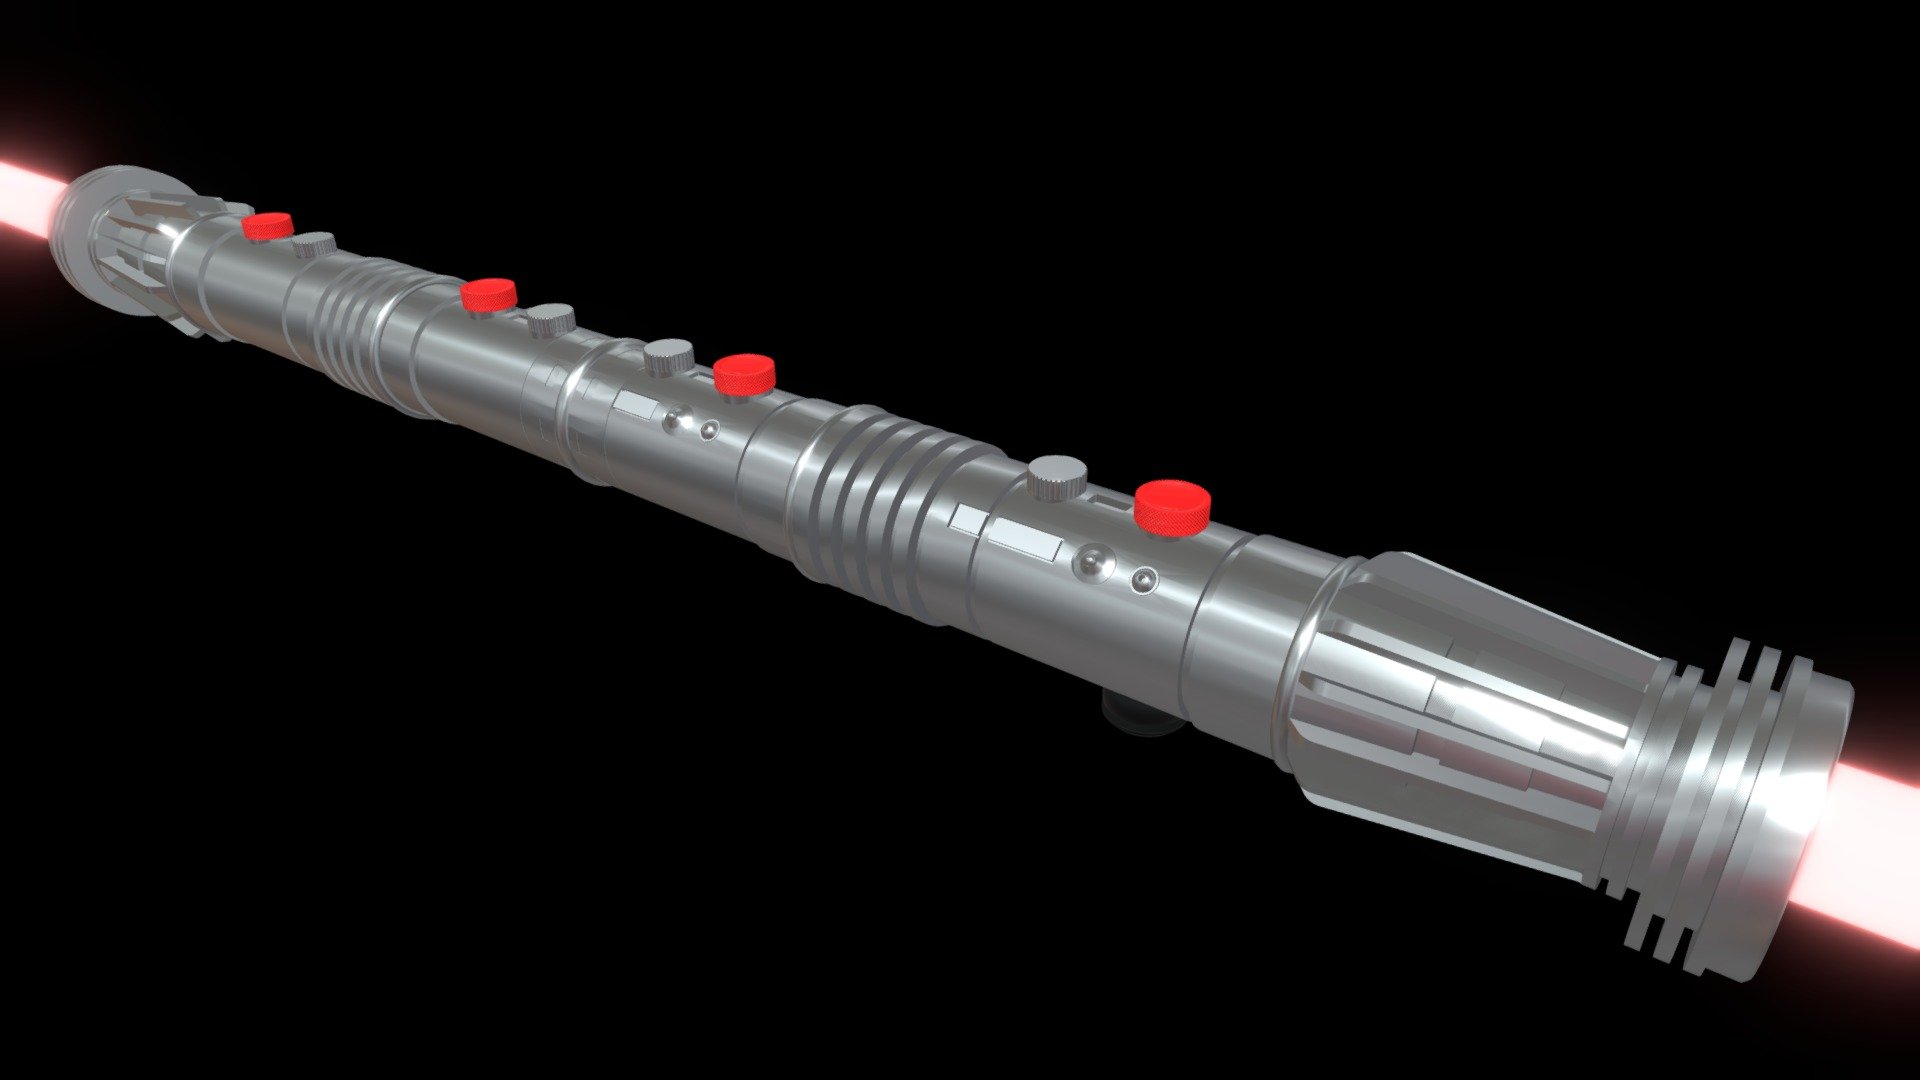 Made in maya 2016 - Darth Maul Ep 1 Double Lightsaber - 3D model by Wil (@fapaknight) 3d model